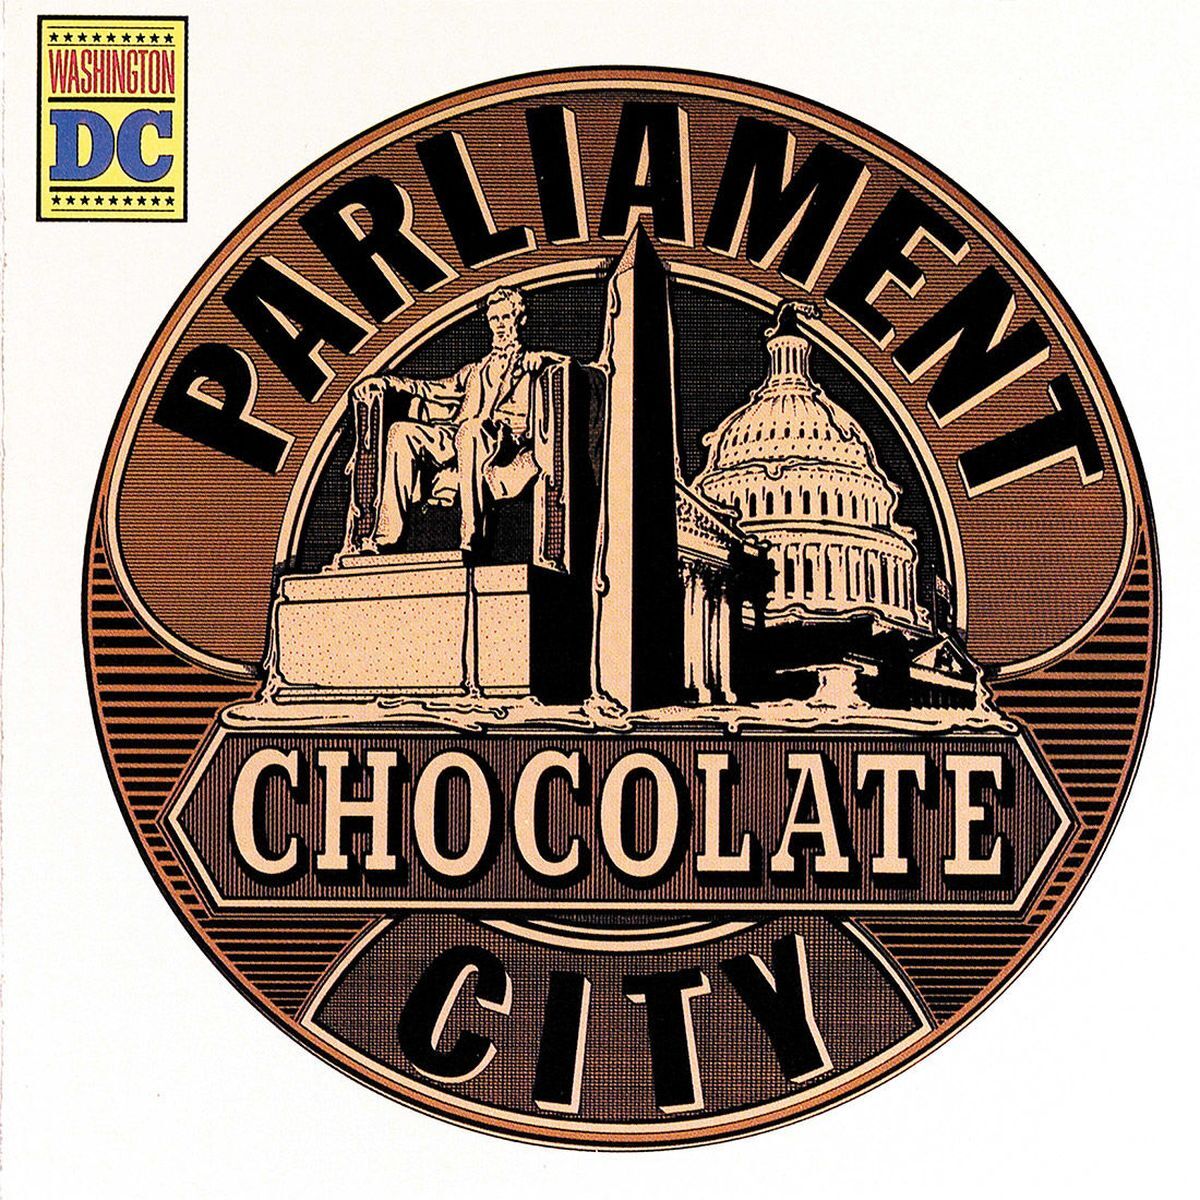 <p>For decades, Washington, D.C., was affectionately known as “Chocolate City” because of its majority African-American population. The Parliament song is a celebration of cities with large Black populations. The funky track playfully opines that it’s only a matter of time before an African-American becomes president of the United States (“They still call it the White House, but that’s a temporary condition too”). Singer George Clinton names Muhammad Ali as president, James Brown as vice-president, Richard Pryor as minister of education, Stevie Wonder as secretary of fine arts, and Aretha Franklin as first lady. How cool would it have been if “Chocolate City” had been played at Barack Obama’s inauguration!</p><p><a href="https://www.youtube.com/watch?v=DZaVA3NS7zE">Listen to the song here</a></p>